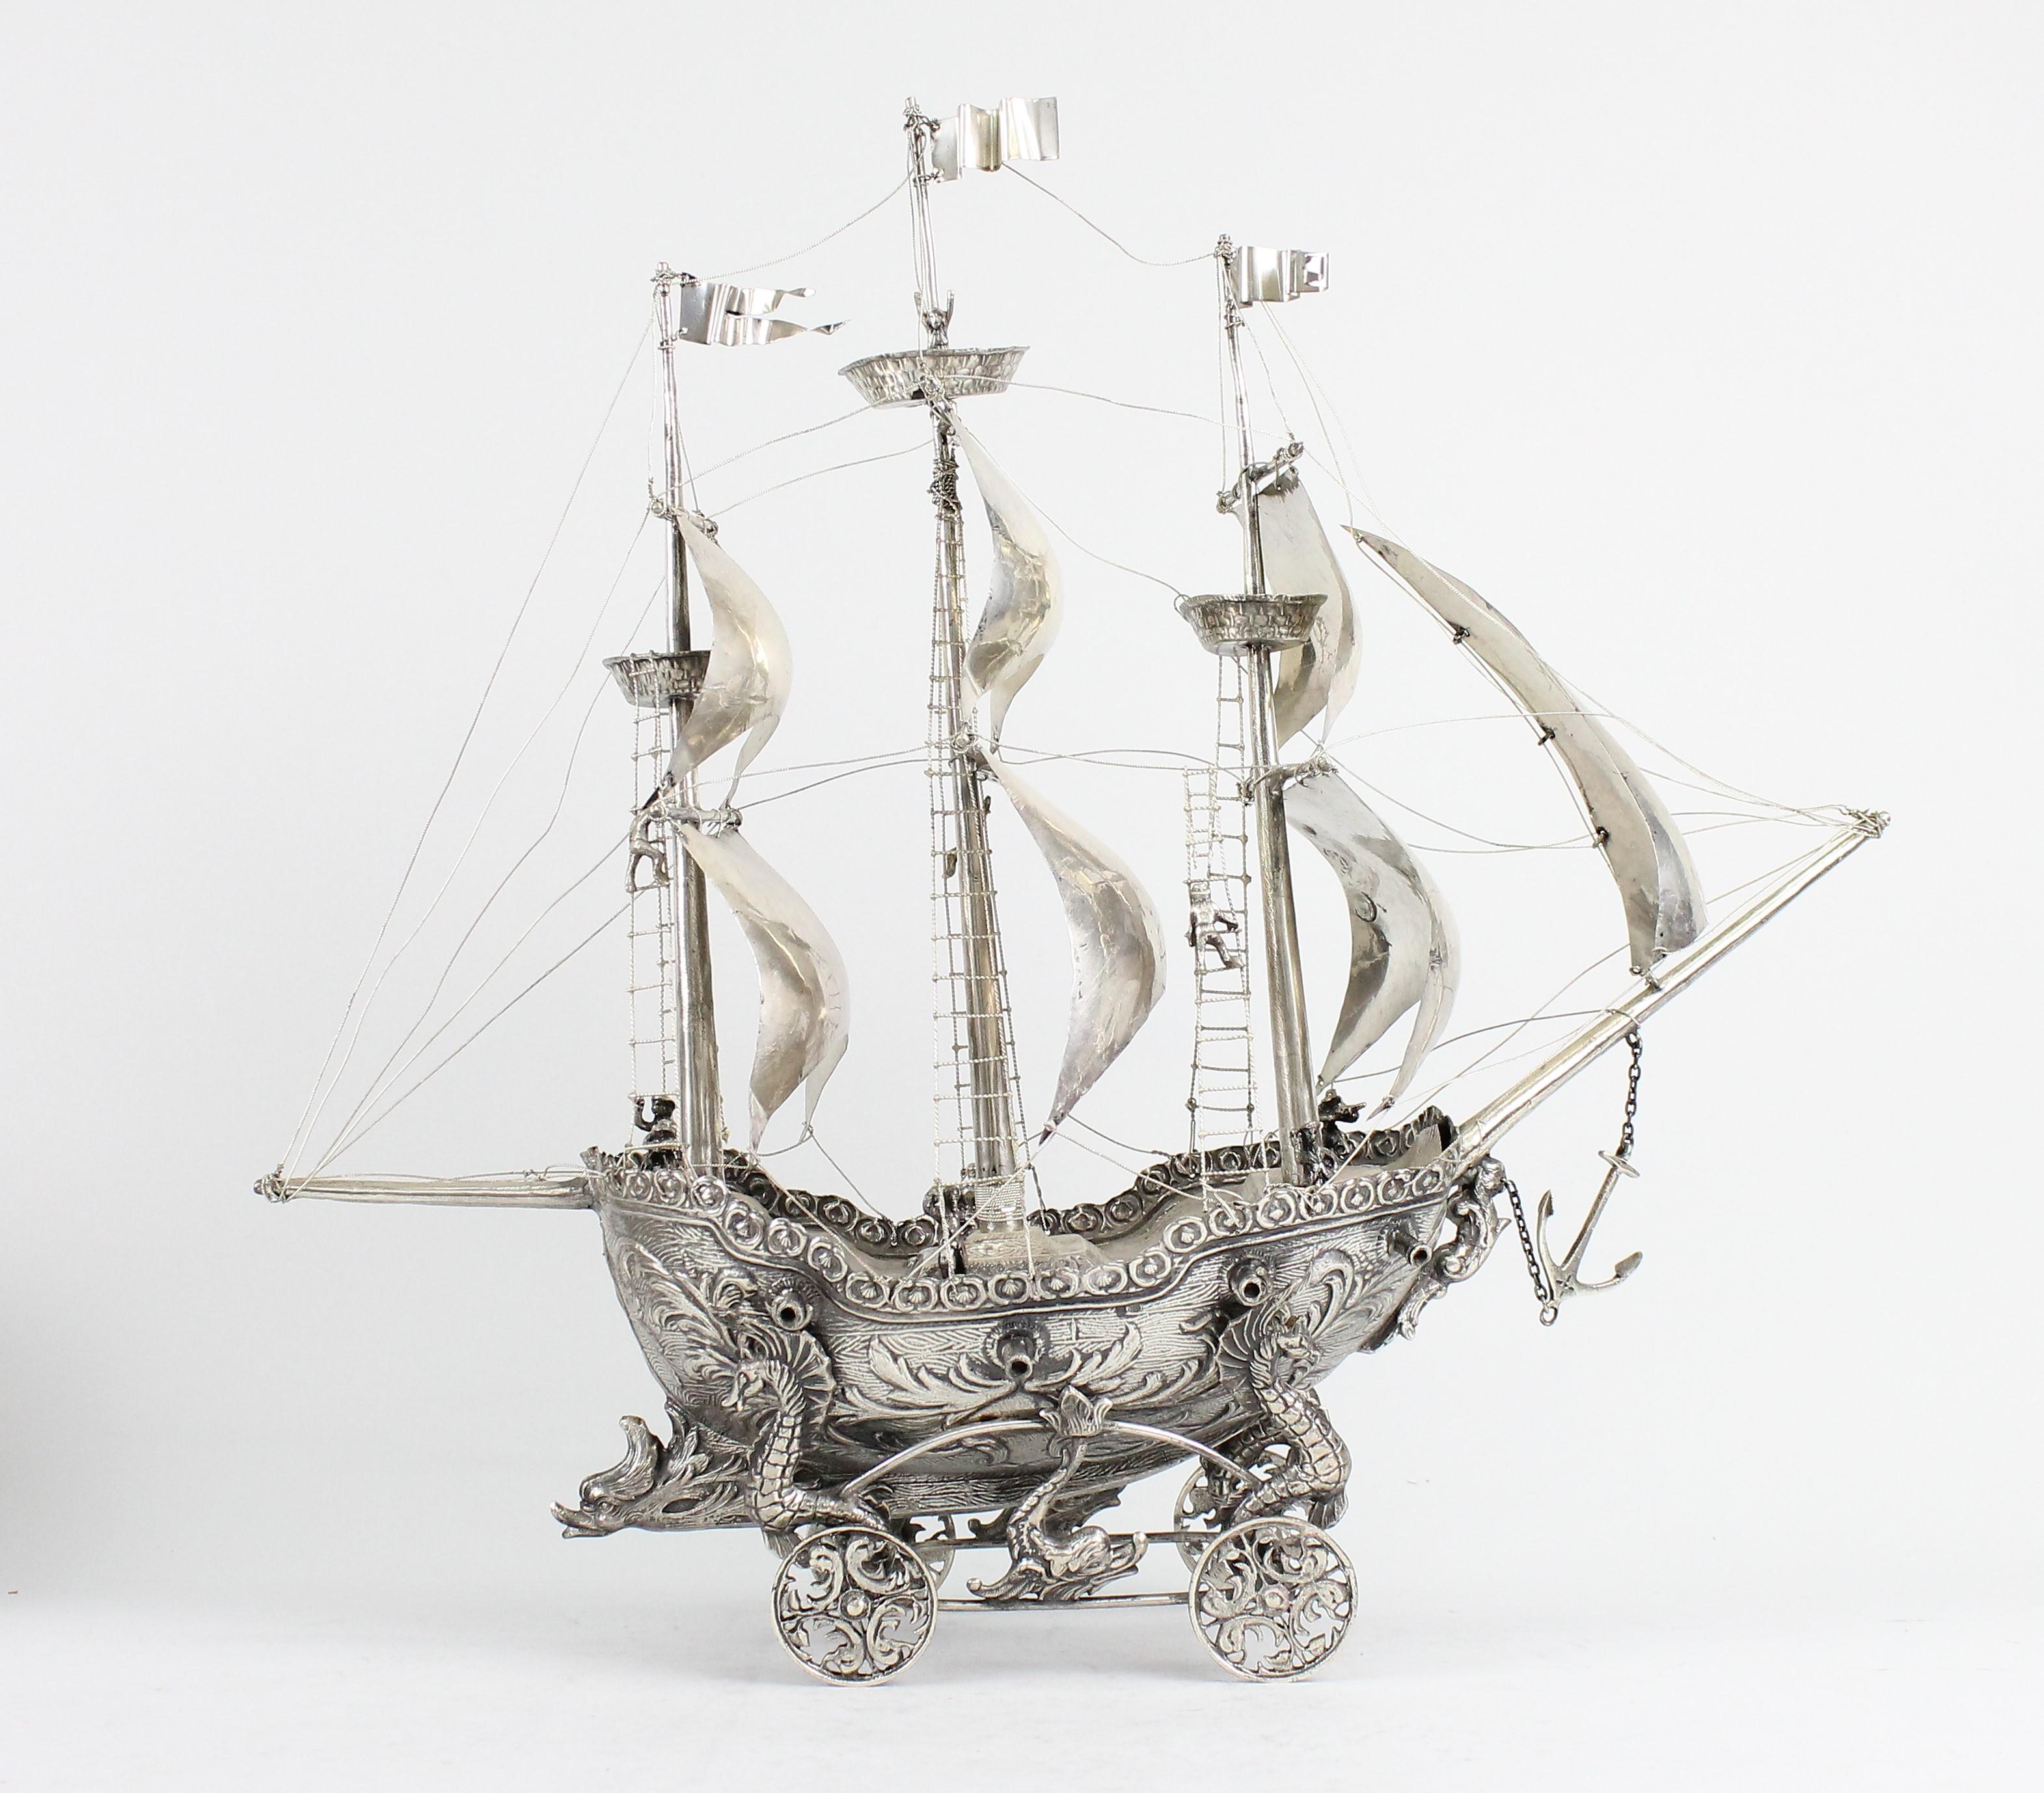 An unusual Spanish silver Nef.
A nice centerpiece that will make a great statement!
With silver maker marks and Spanish pentagram marks (91.5% silver).
Made in the first half of the 20th century.
Weight 867 grams.
Formed as a three-masted galleon